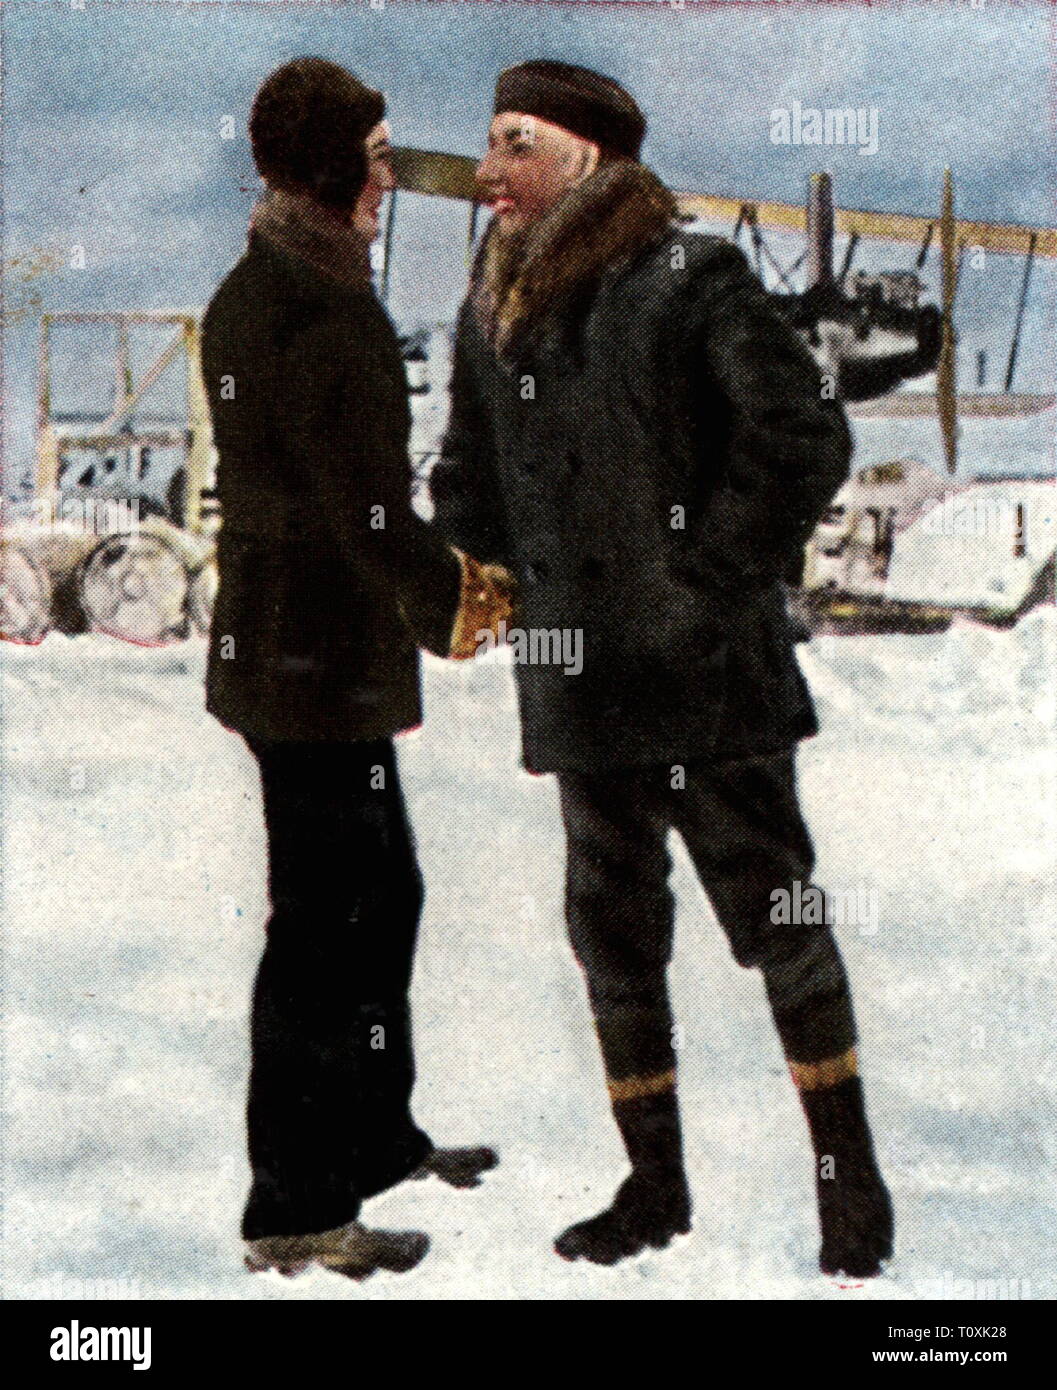 expedition, arctic, flights across the North Pole, the American Richard E. Byrd and the Norwegian Roald Amundsen are meeting each other, May 1926, coloured photograph, cigarette card, series 'Die Nachkriegszeit', 1935, flights, trans arctic flight, exploration, explorations, arctic explorer, USA, United States of America, Norway, men, man, people, 1920s, 20th century, expedition, expeditions, meeting, meetings, coloured, colored, post war period, post-war period, post-war years, post-war era, historic, historical, Additional-Rights-Clearance-Info-Not-Available Stock Photo